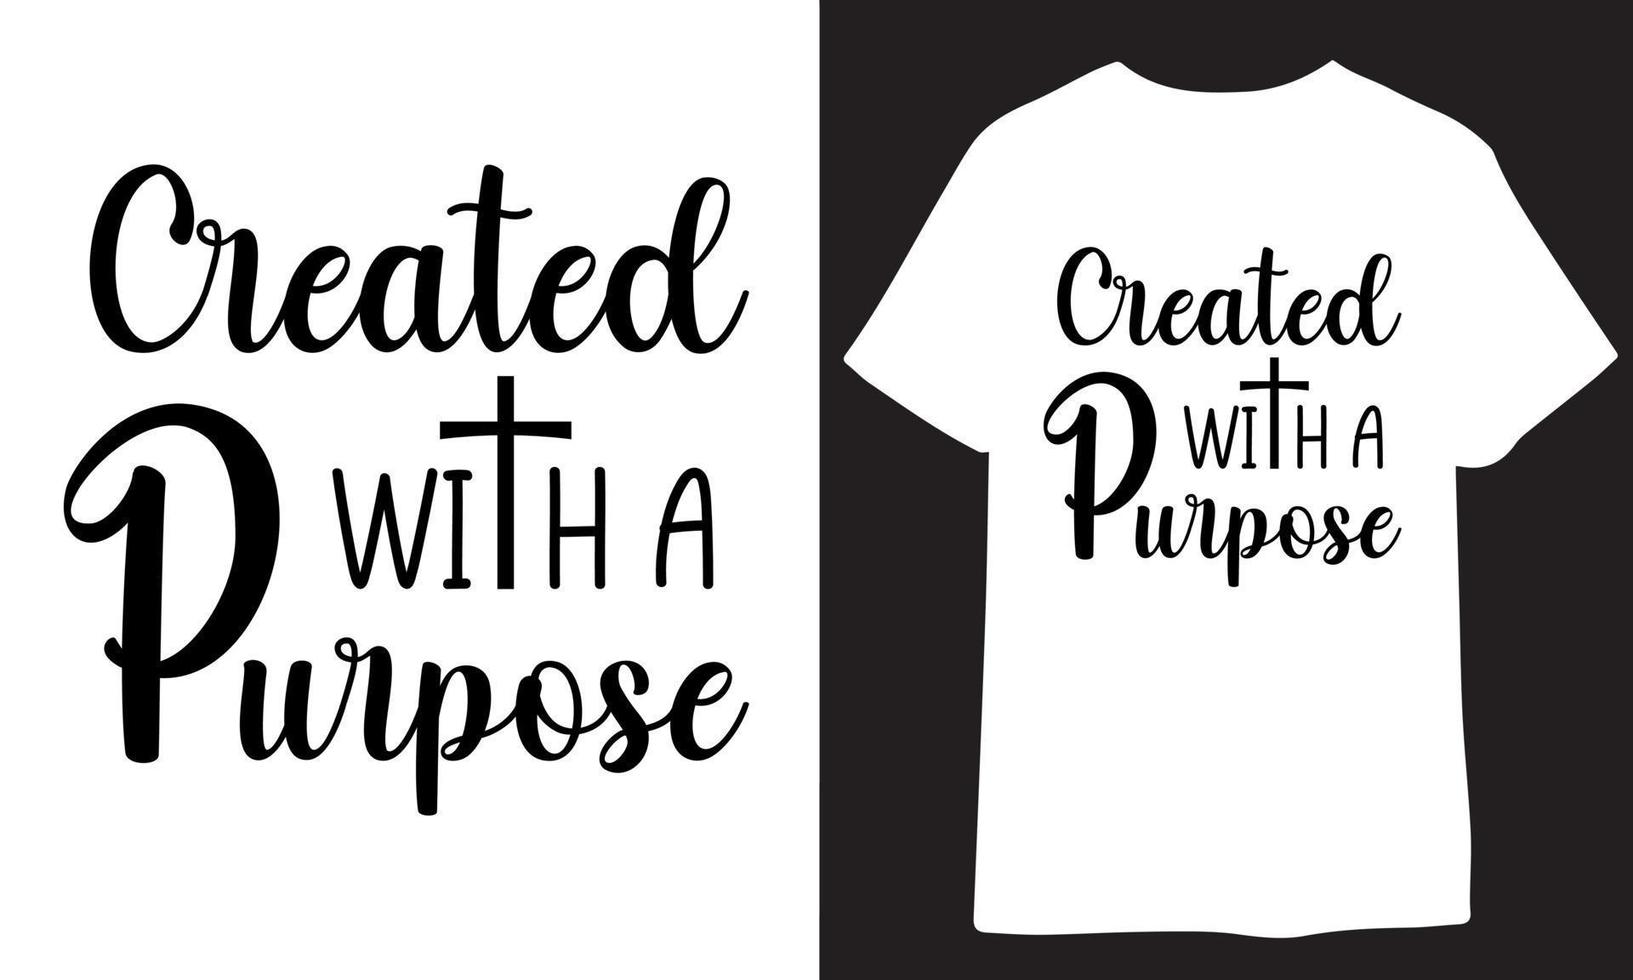 Created with A purpose. christian t shirt design vector